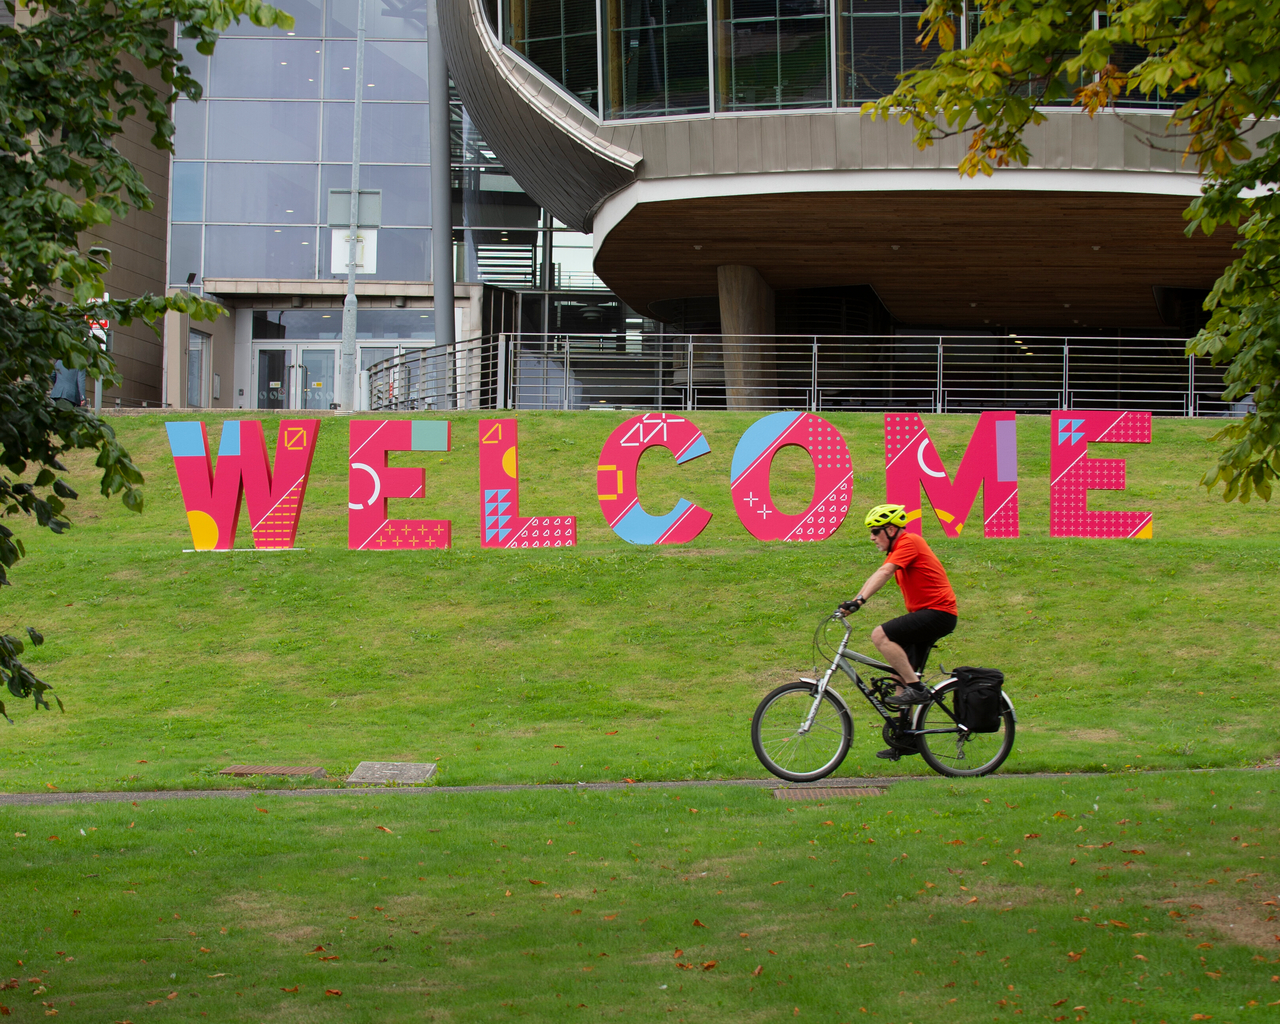 Welcome letters at Craiglockhart campus